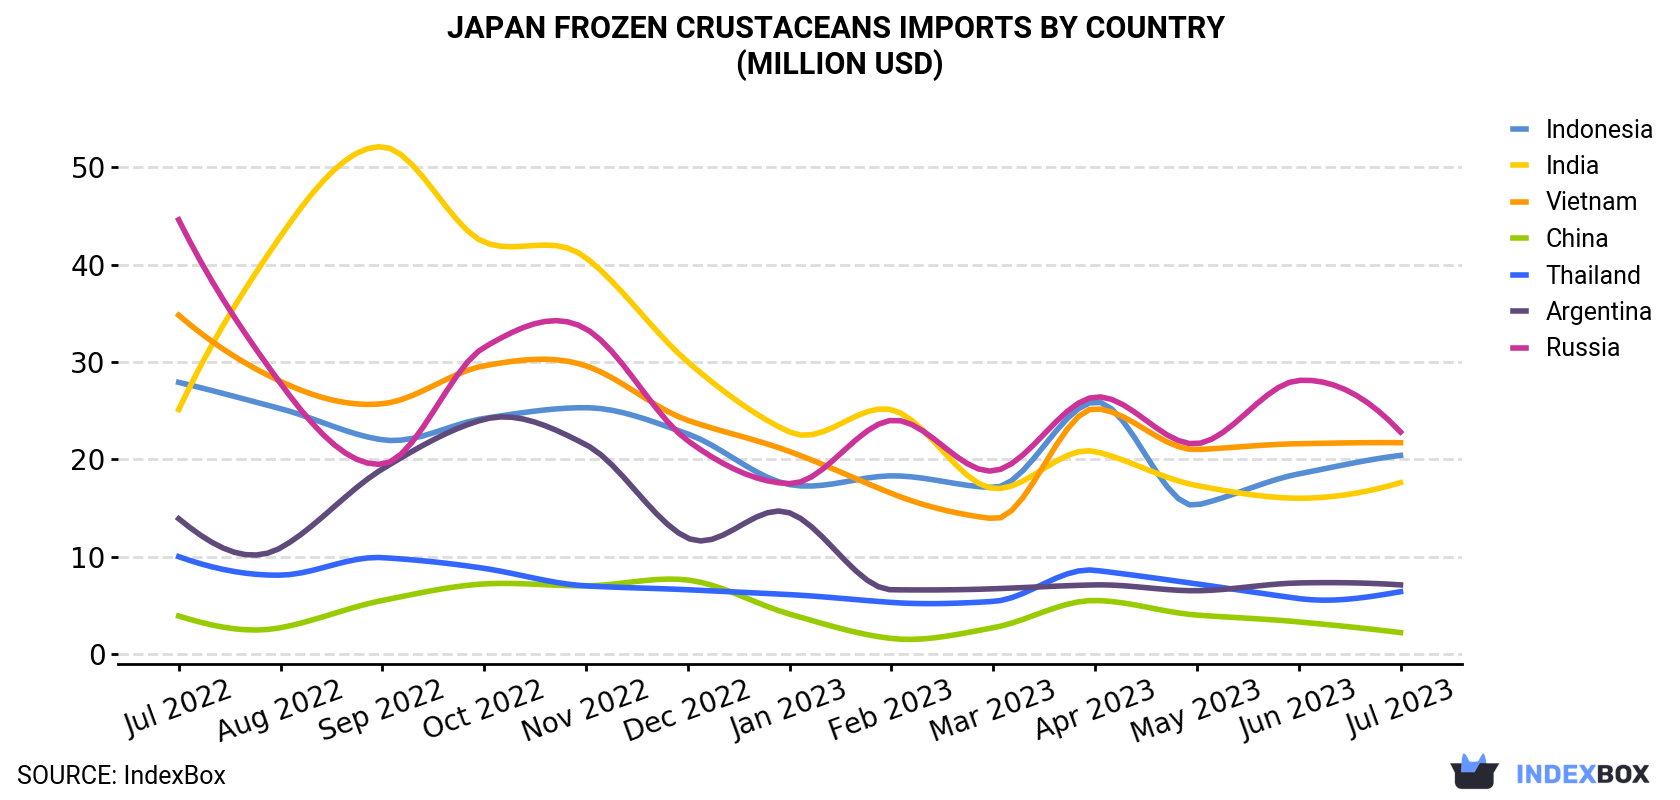 Japan Frozen Crustaceans Imports By Country (Million USD)